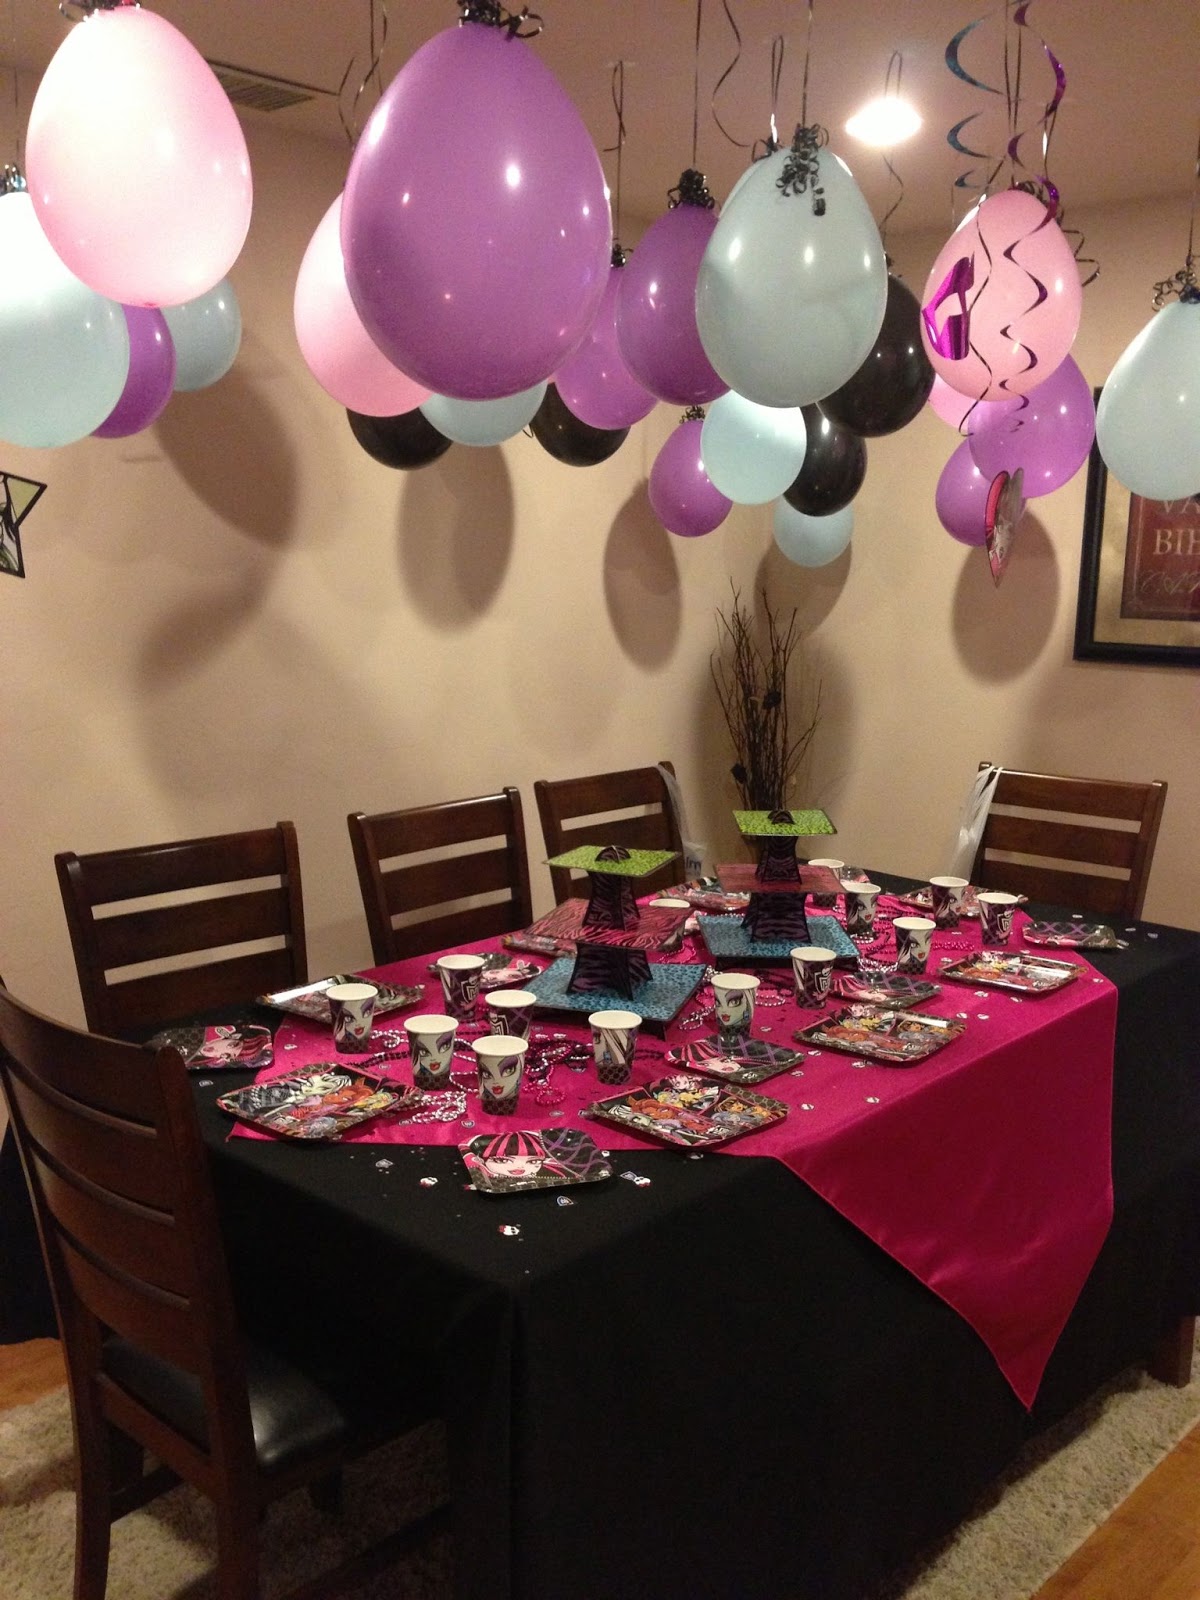 Best Balloon Decoration Ideas for Kids Birthday Party